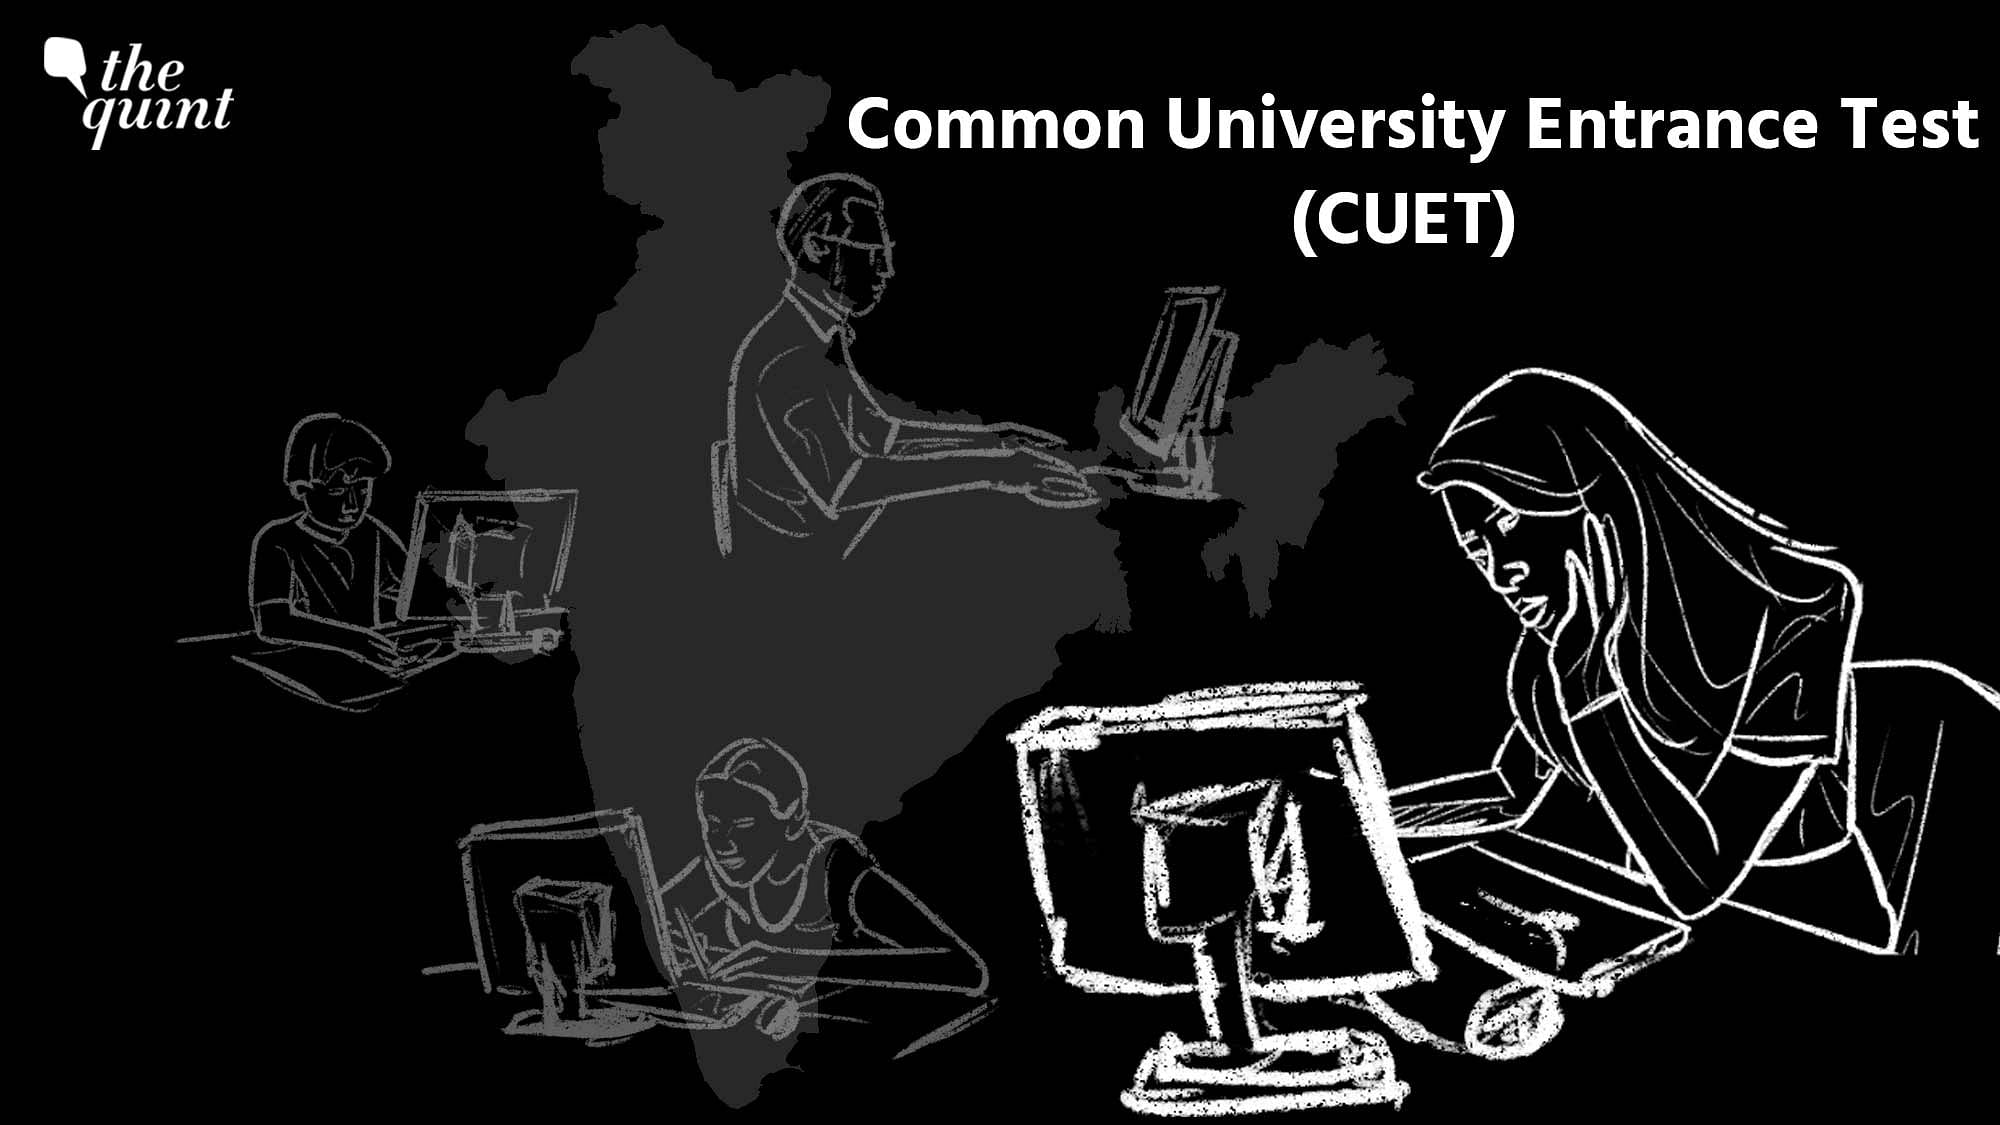 <div class="paragraphs"><p>Due to "administrative and technical reasons" at some exam centers, the 2022 CUET-UG Phase II examination which was earlier scheduled to be held between 4 and 6 August were <a href="https://www.thequint.com/news/education/common-university-entrance-test-undergraduate-cuet-ug-postponed-technical-reasons-national-testing-agency">postponed</a> to the dates between 12 and 14 August.</p></div>